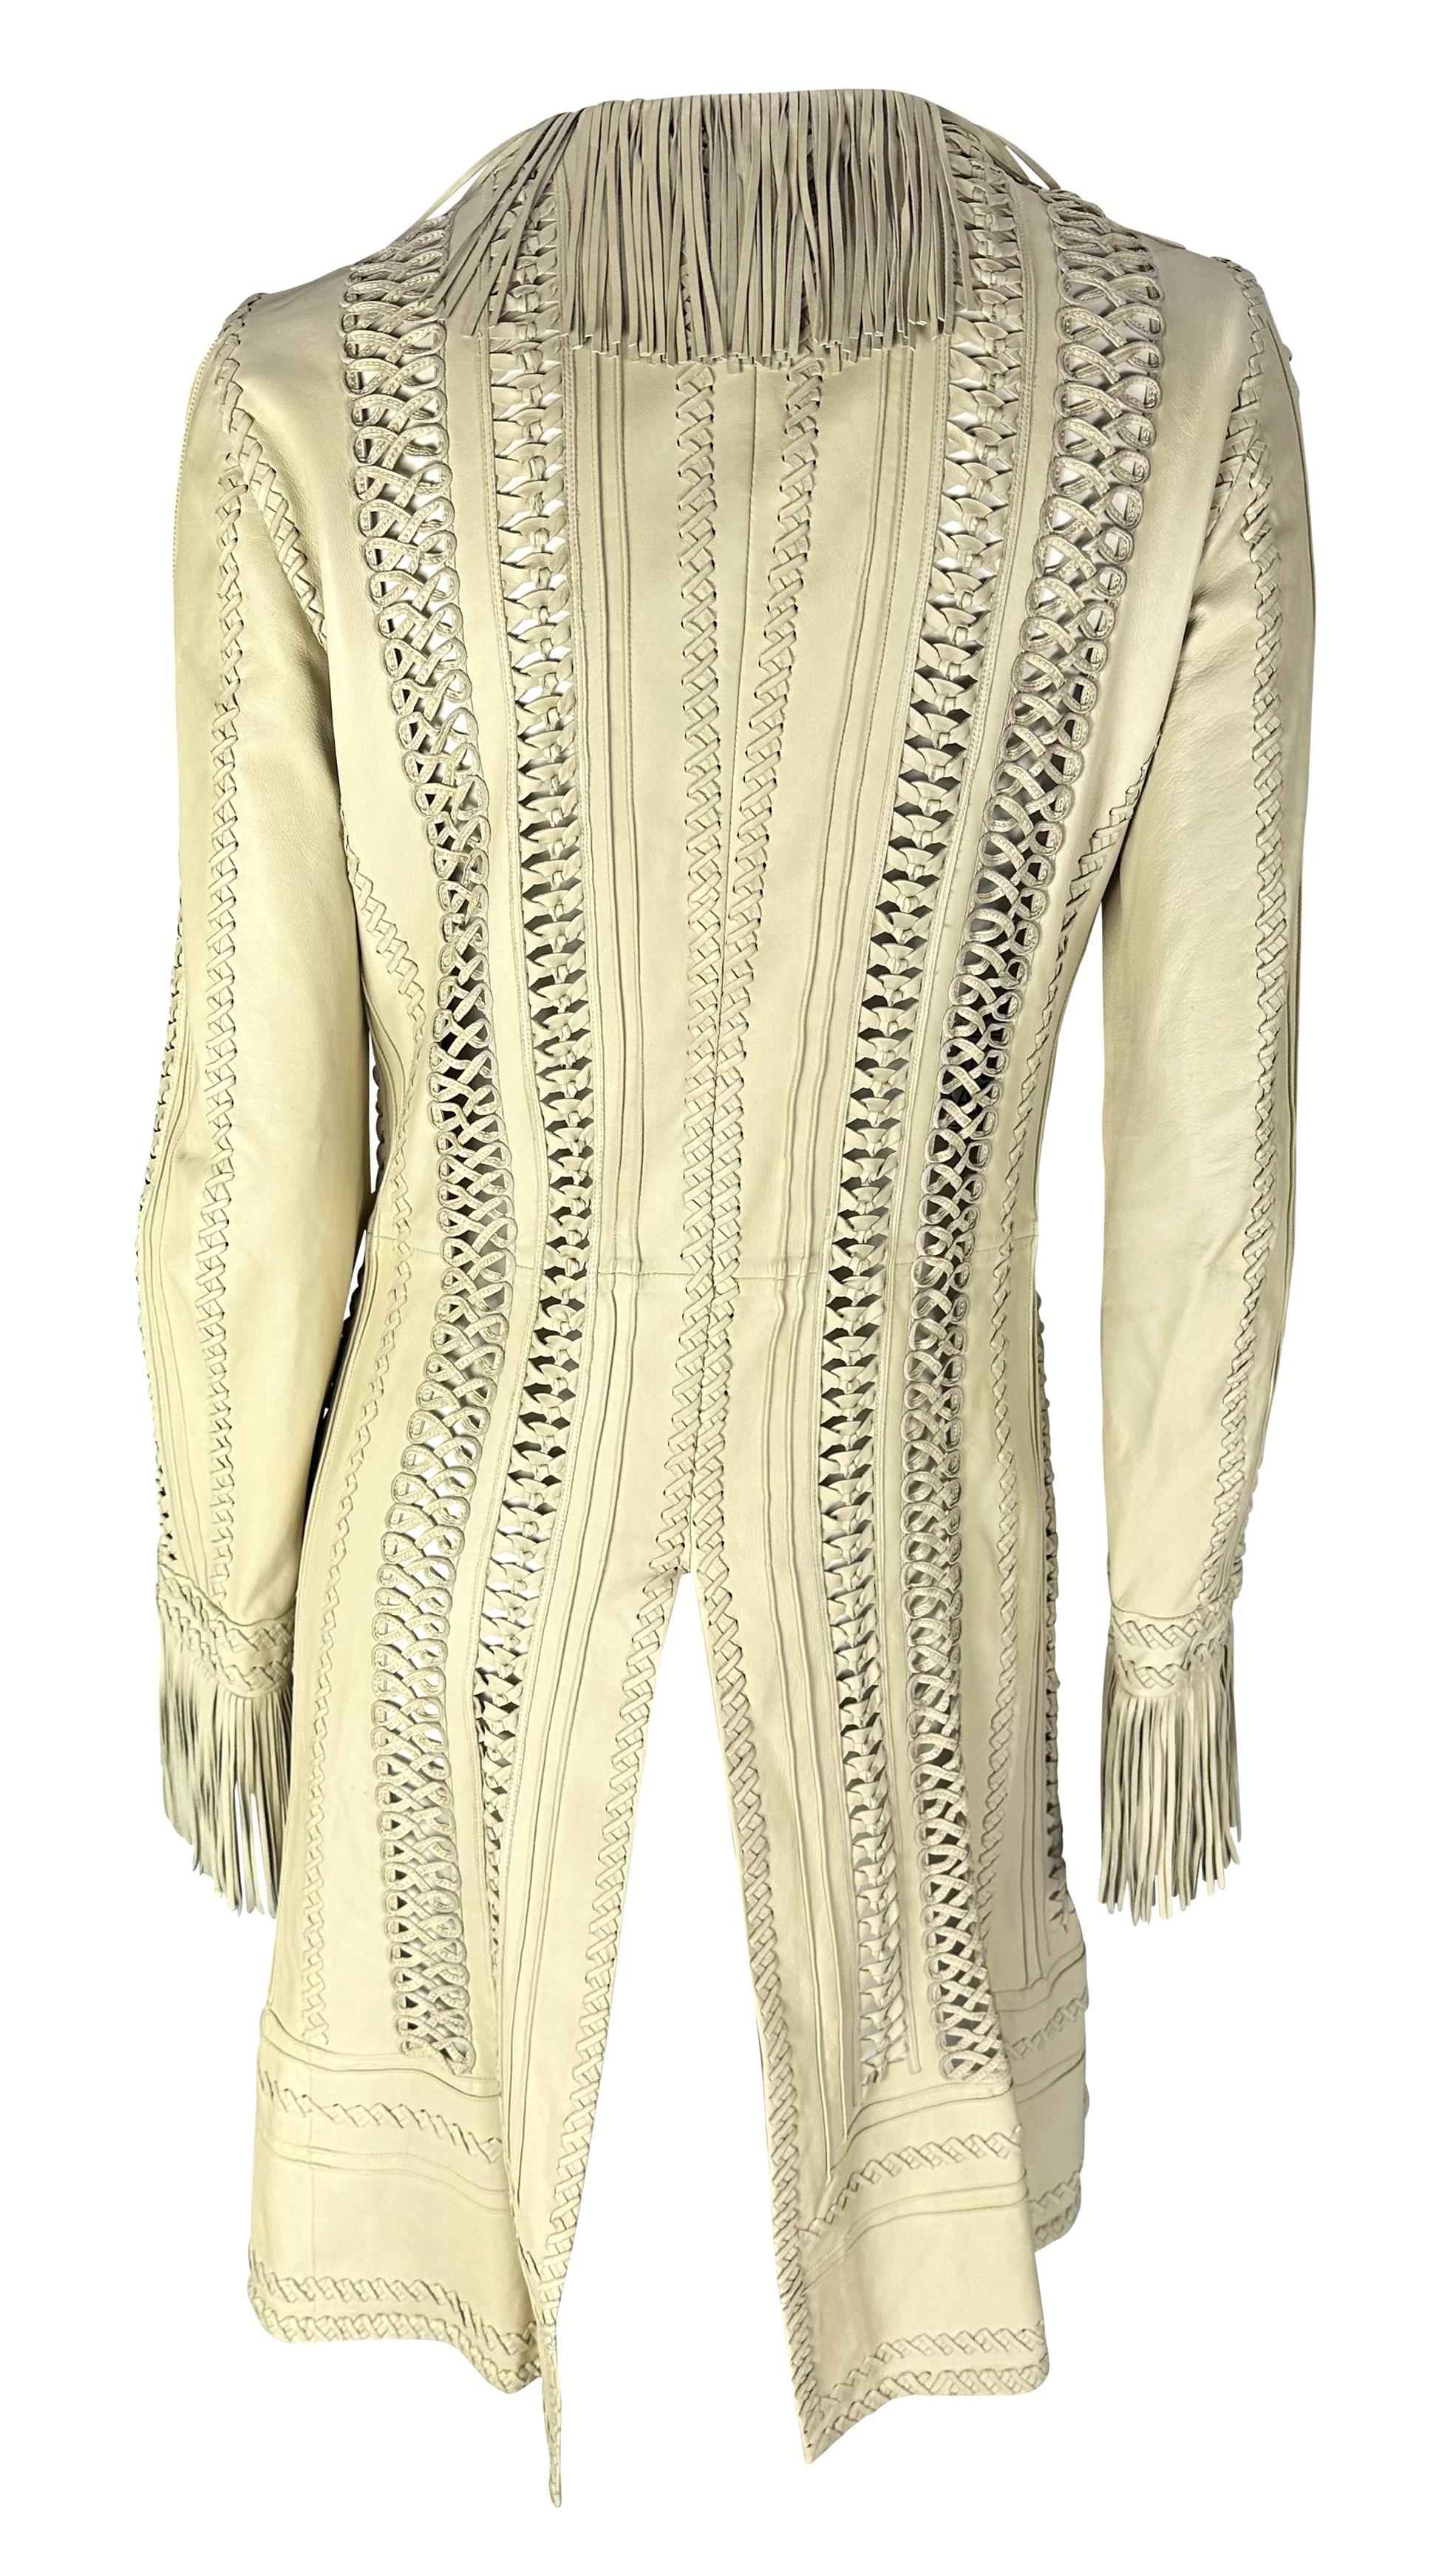 S/S 2002 Gianni Versace by Donatella Runway Fringe Panel Cream Leather Coat For Sale 4